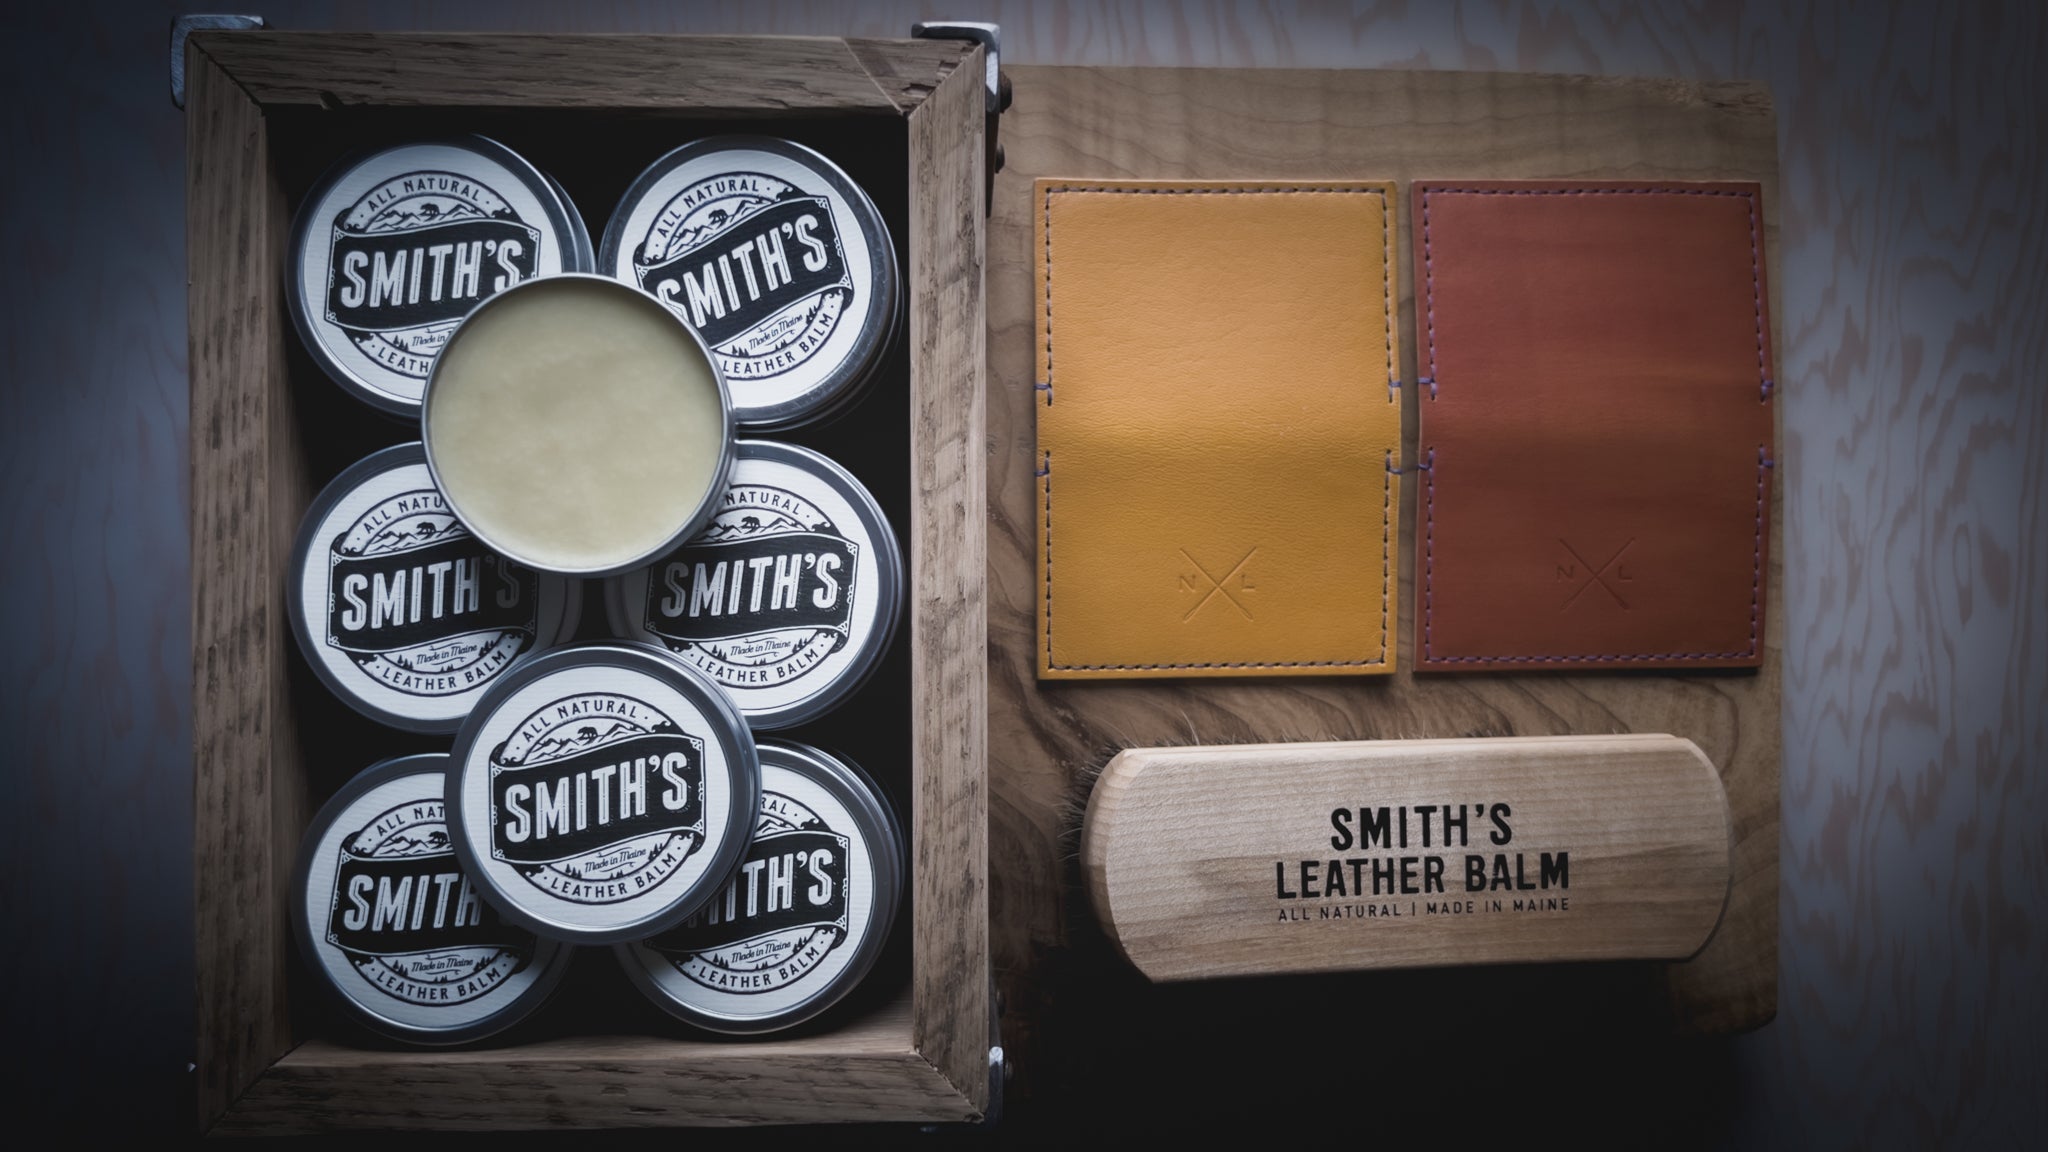 Smiths Leather Balm handcrafted products for leather goods